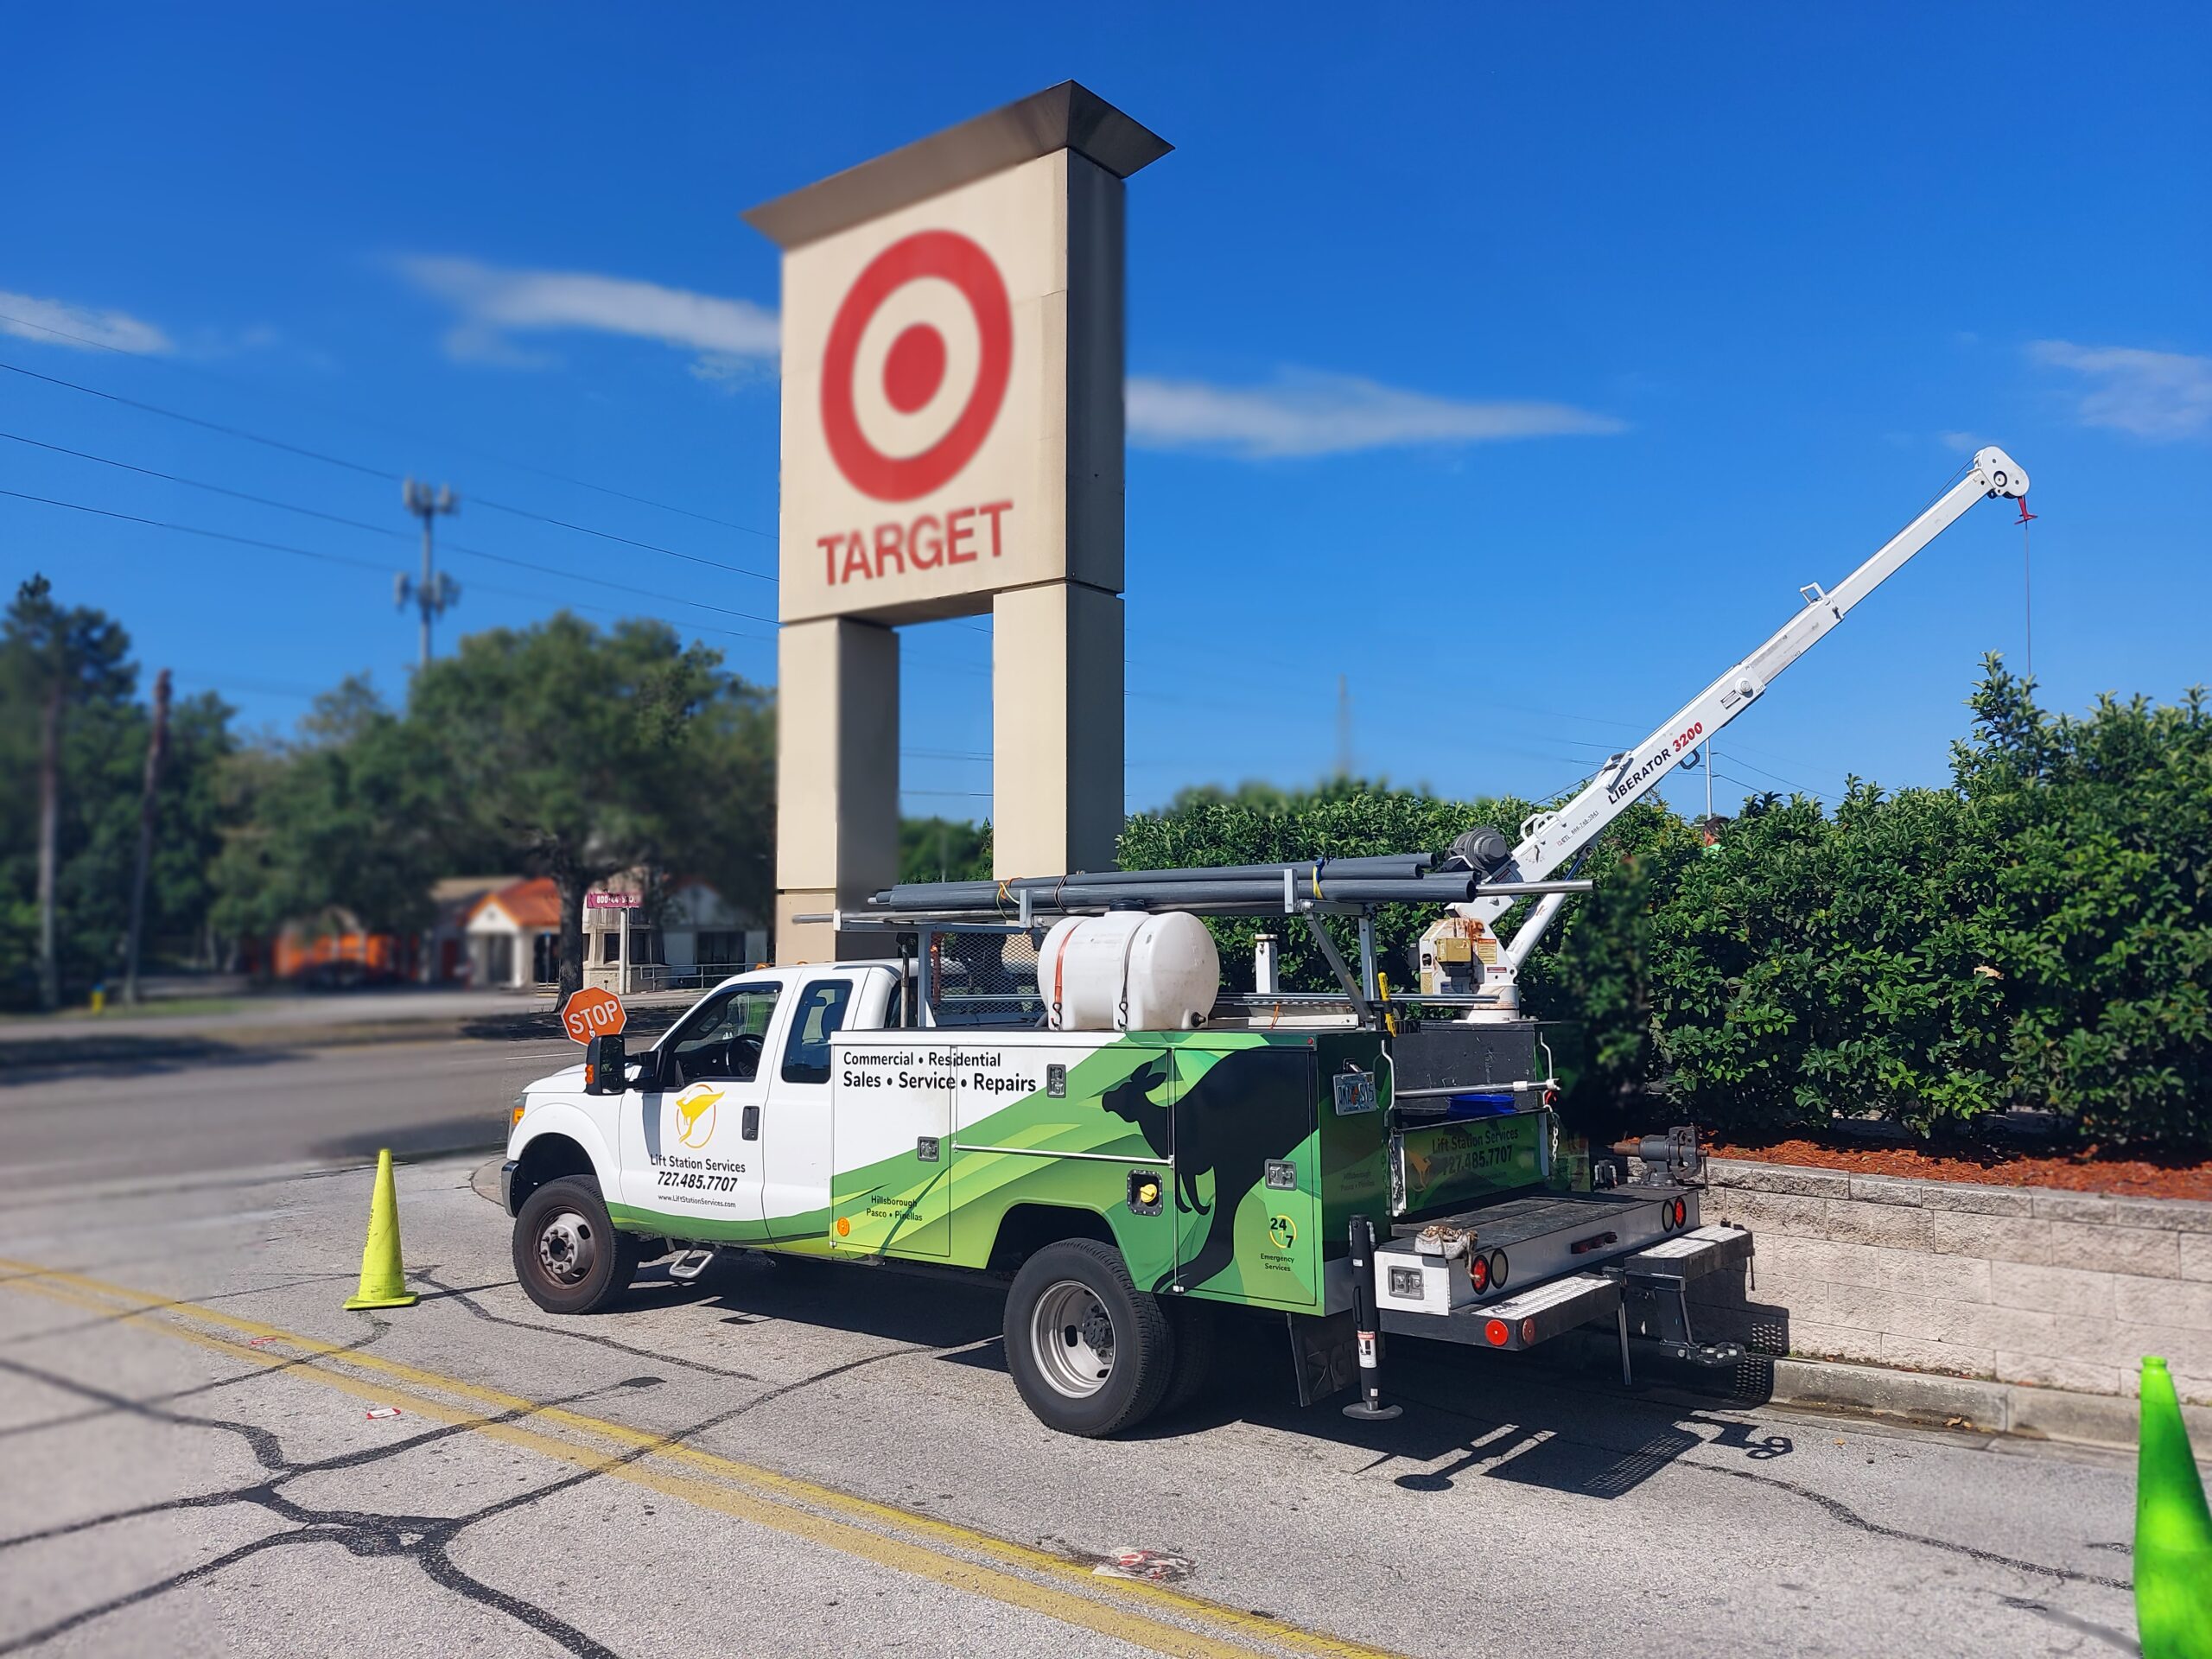 New Pumps Arrive Just In Time For 3rd Blowout of Temporary Bypass at Target in Tampa, FL